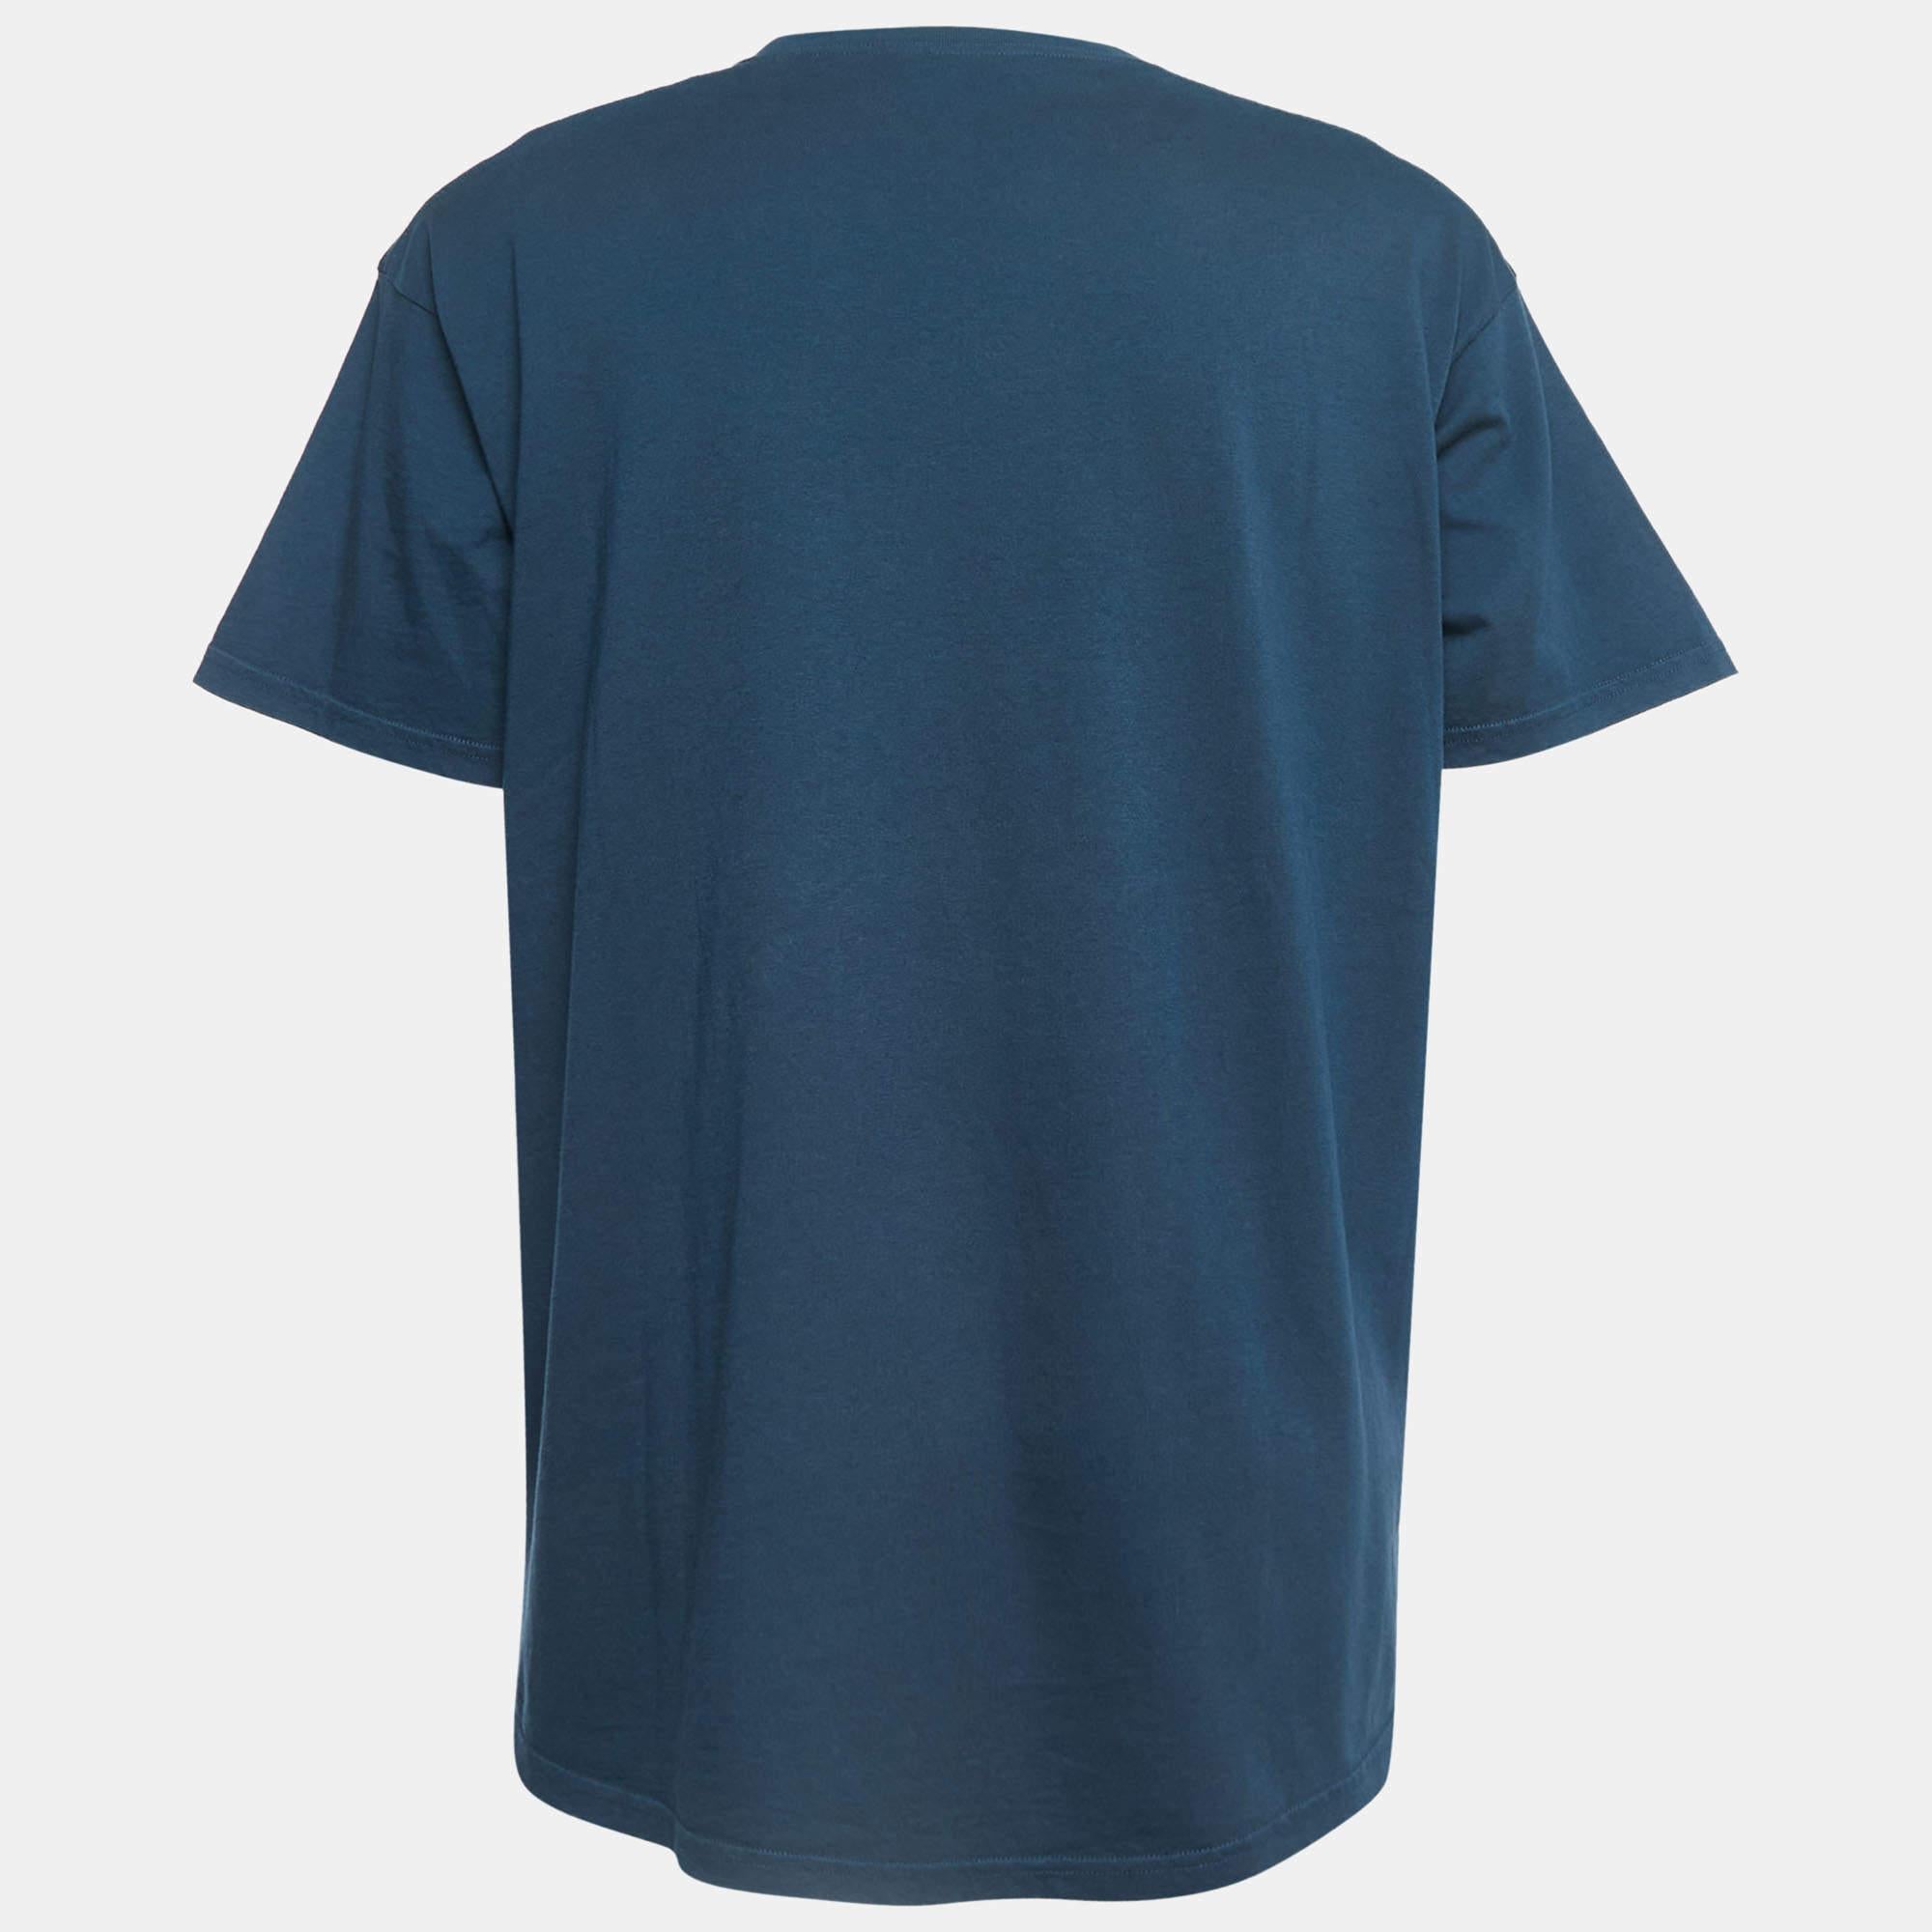 Perfect for casual outings or errands, this T-shirt is the best piece to feel comfortable and stylish in. It flaunts a catchy shade and a relaxed fit.

